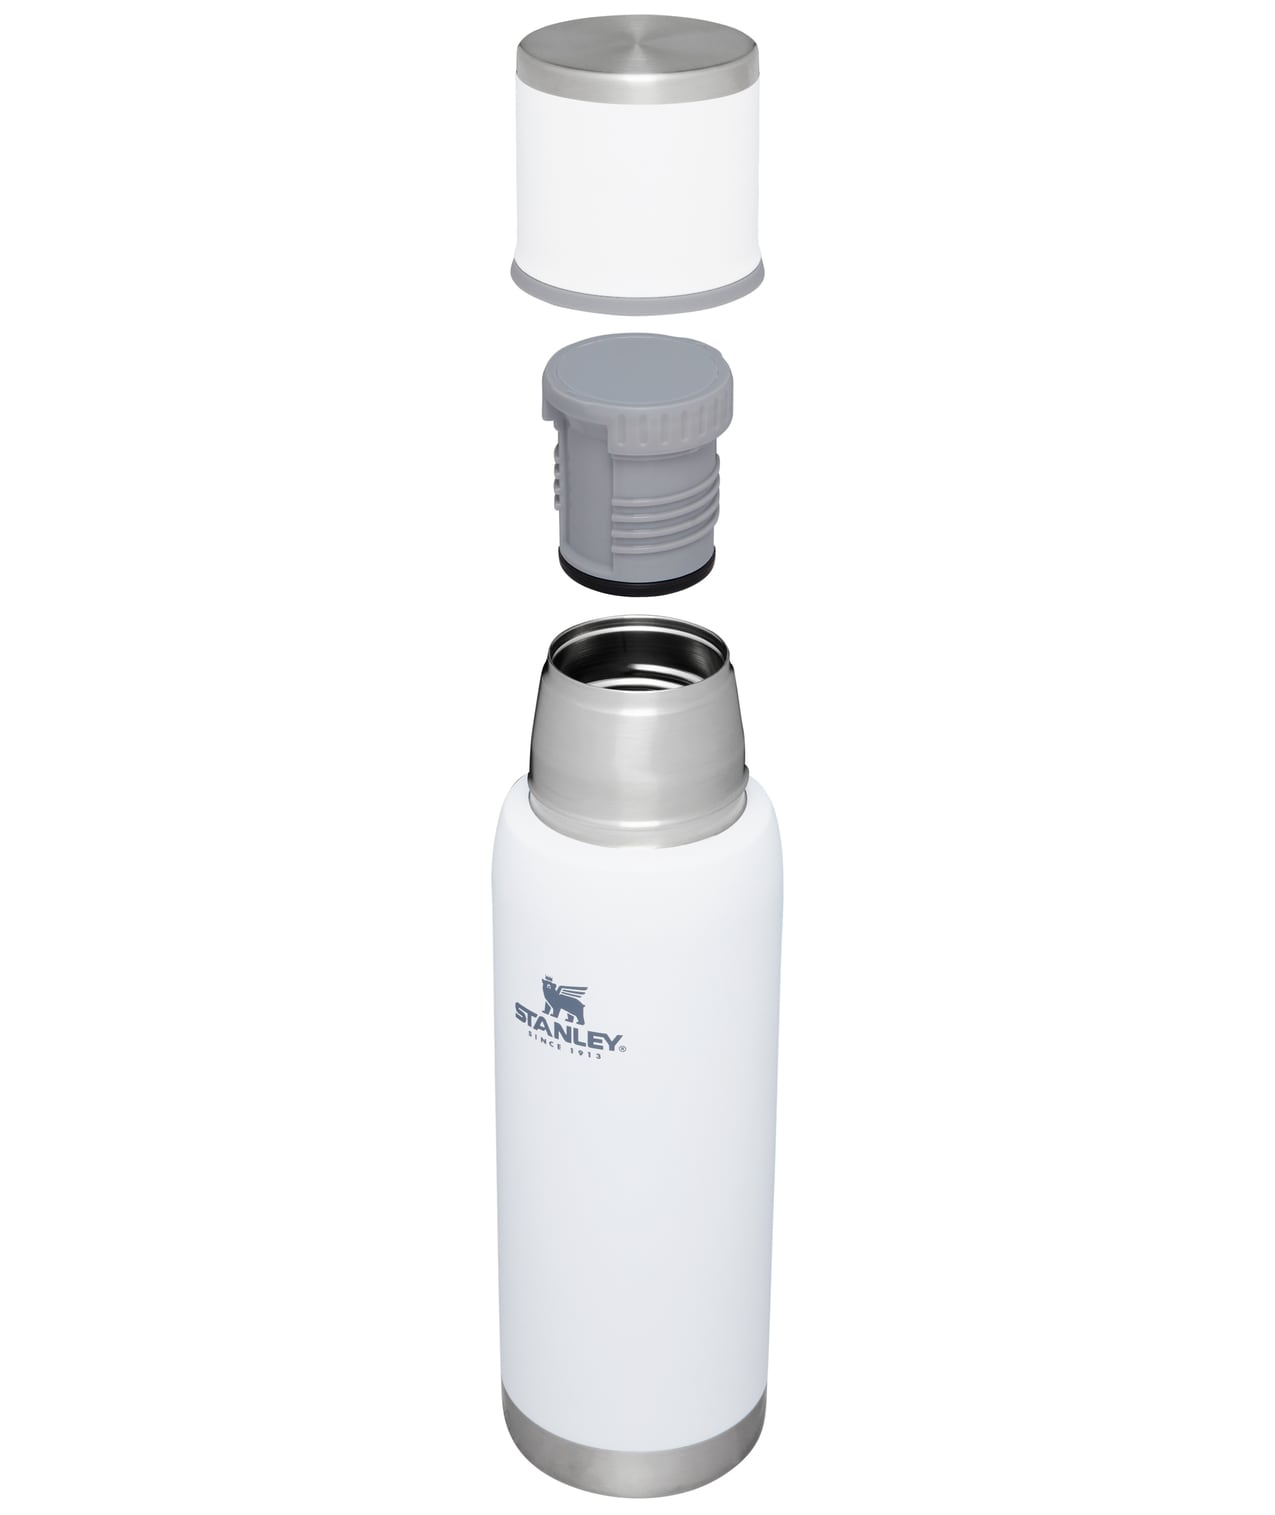  Stanley Water bottles : Sports & Outdoors